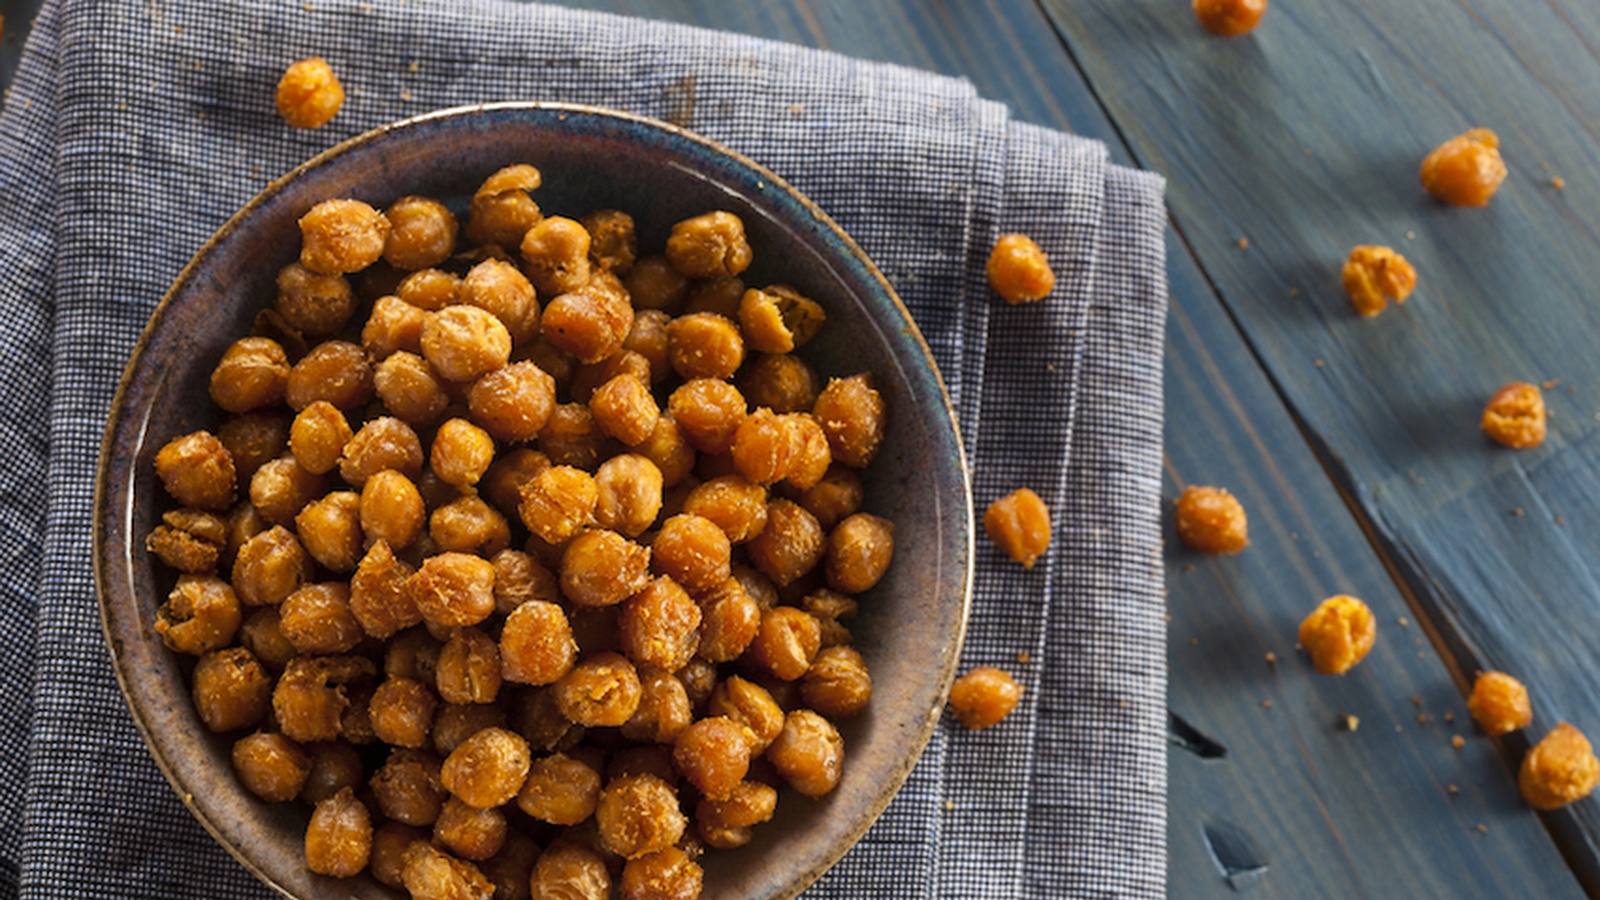 We Are Loving The Idea Of Chickpea Snacks. Here’s Why…